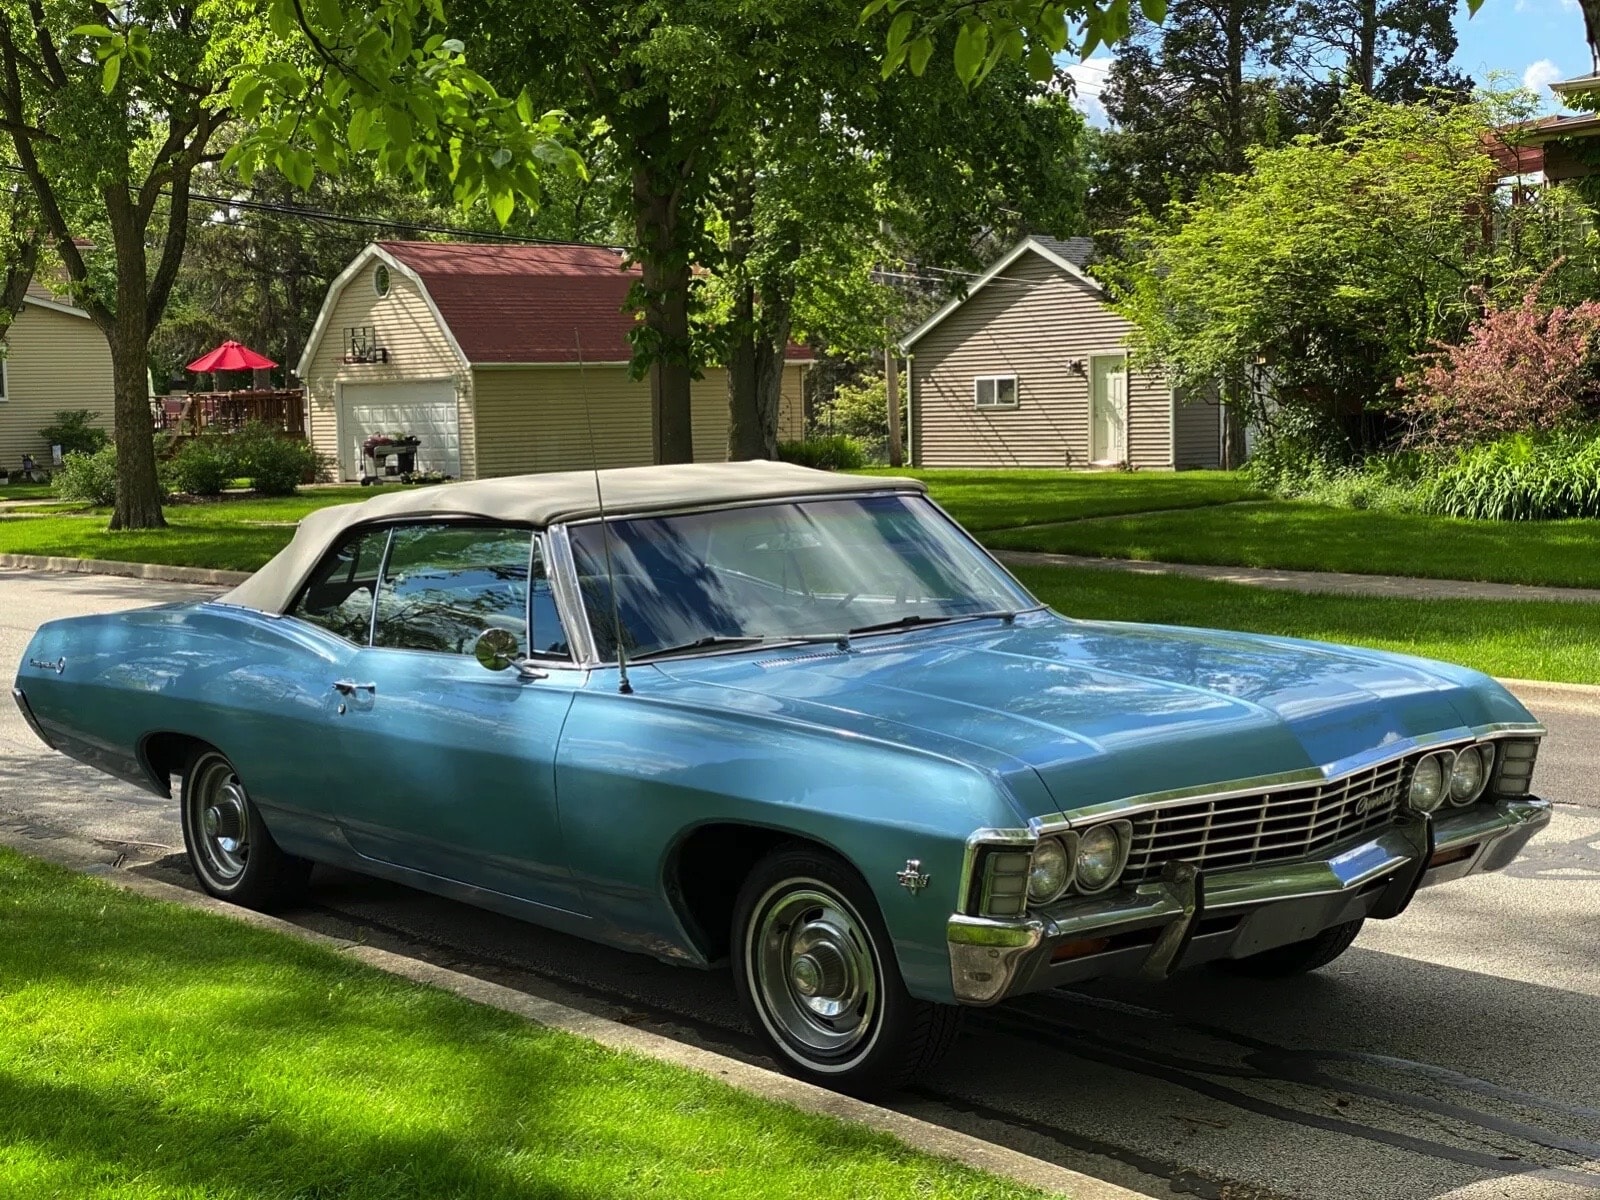 1967 Chevy Impala Super Sport with L72 427